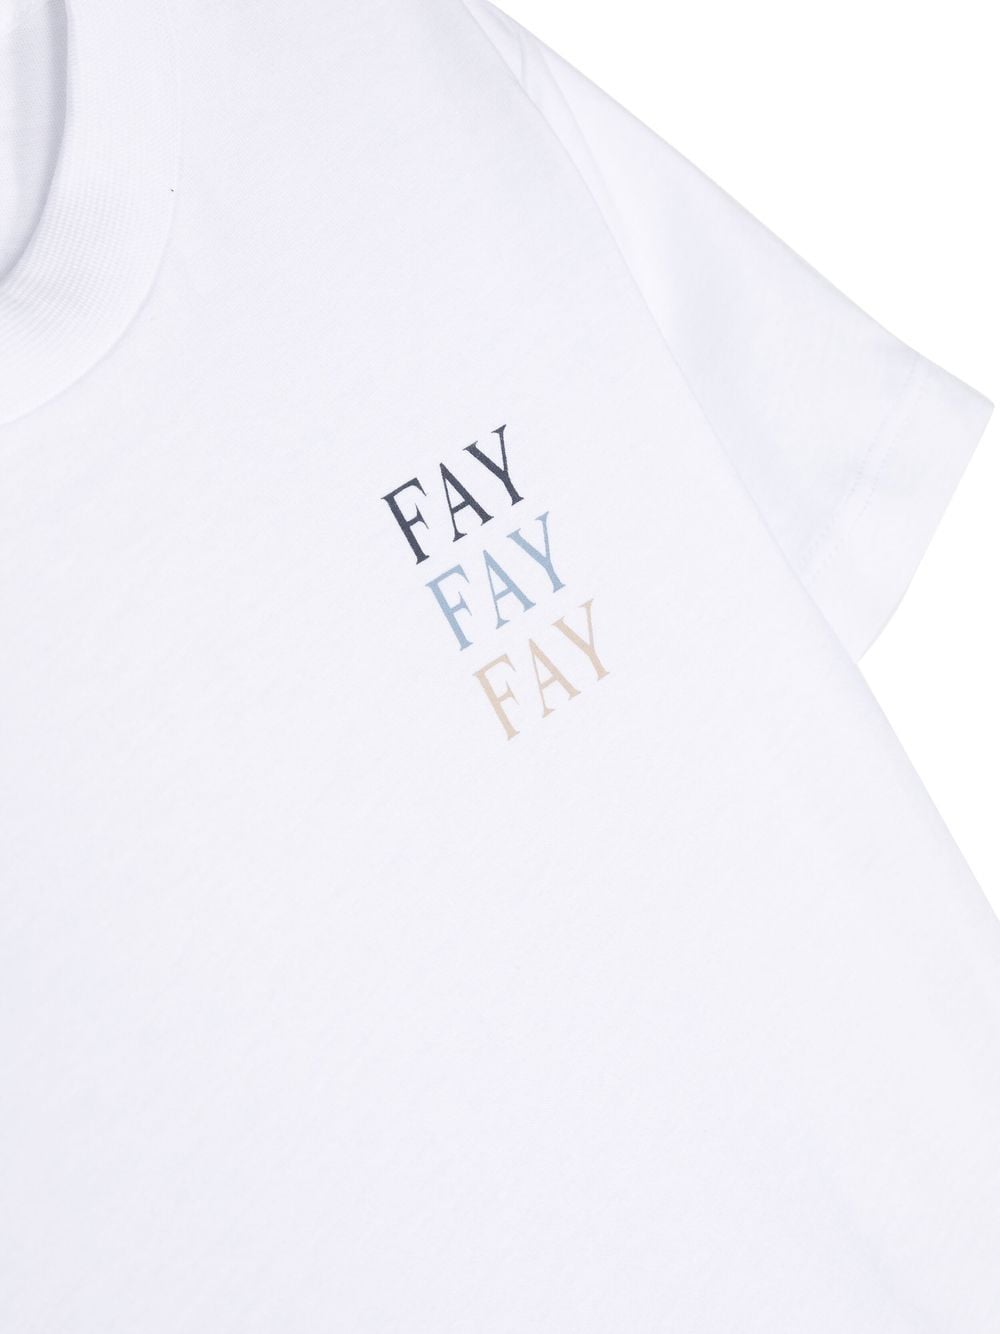 White t-shirt for girls with logo